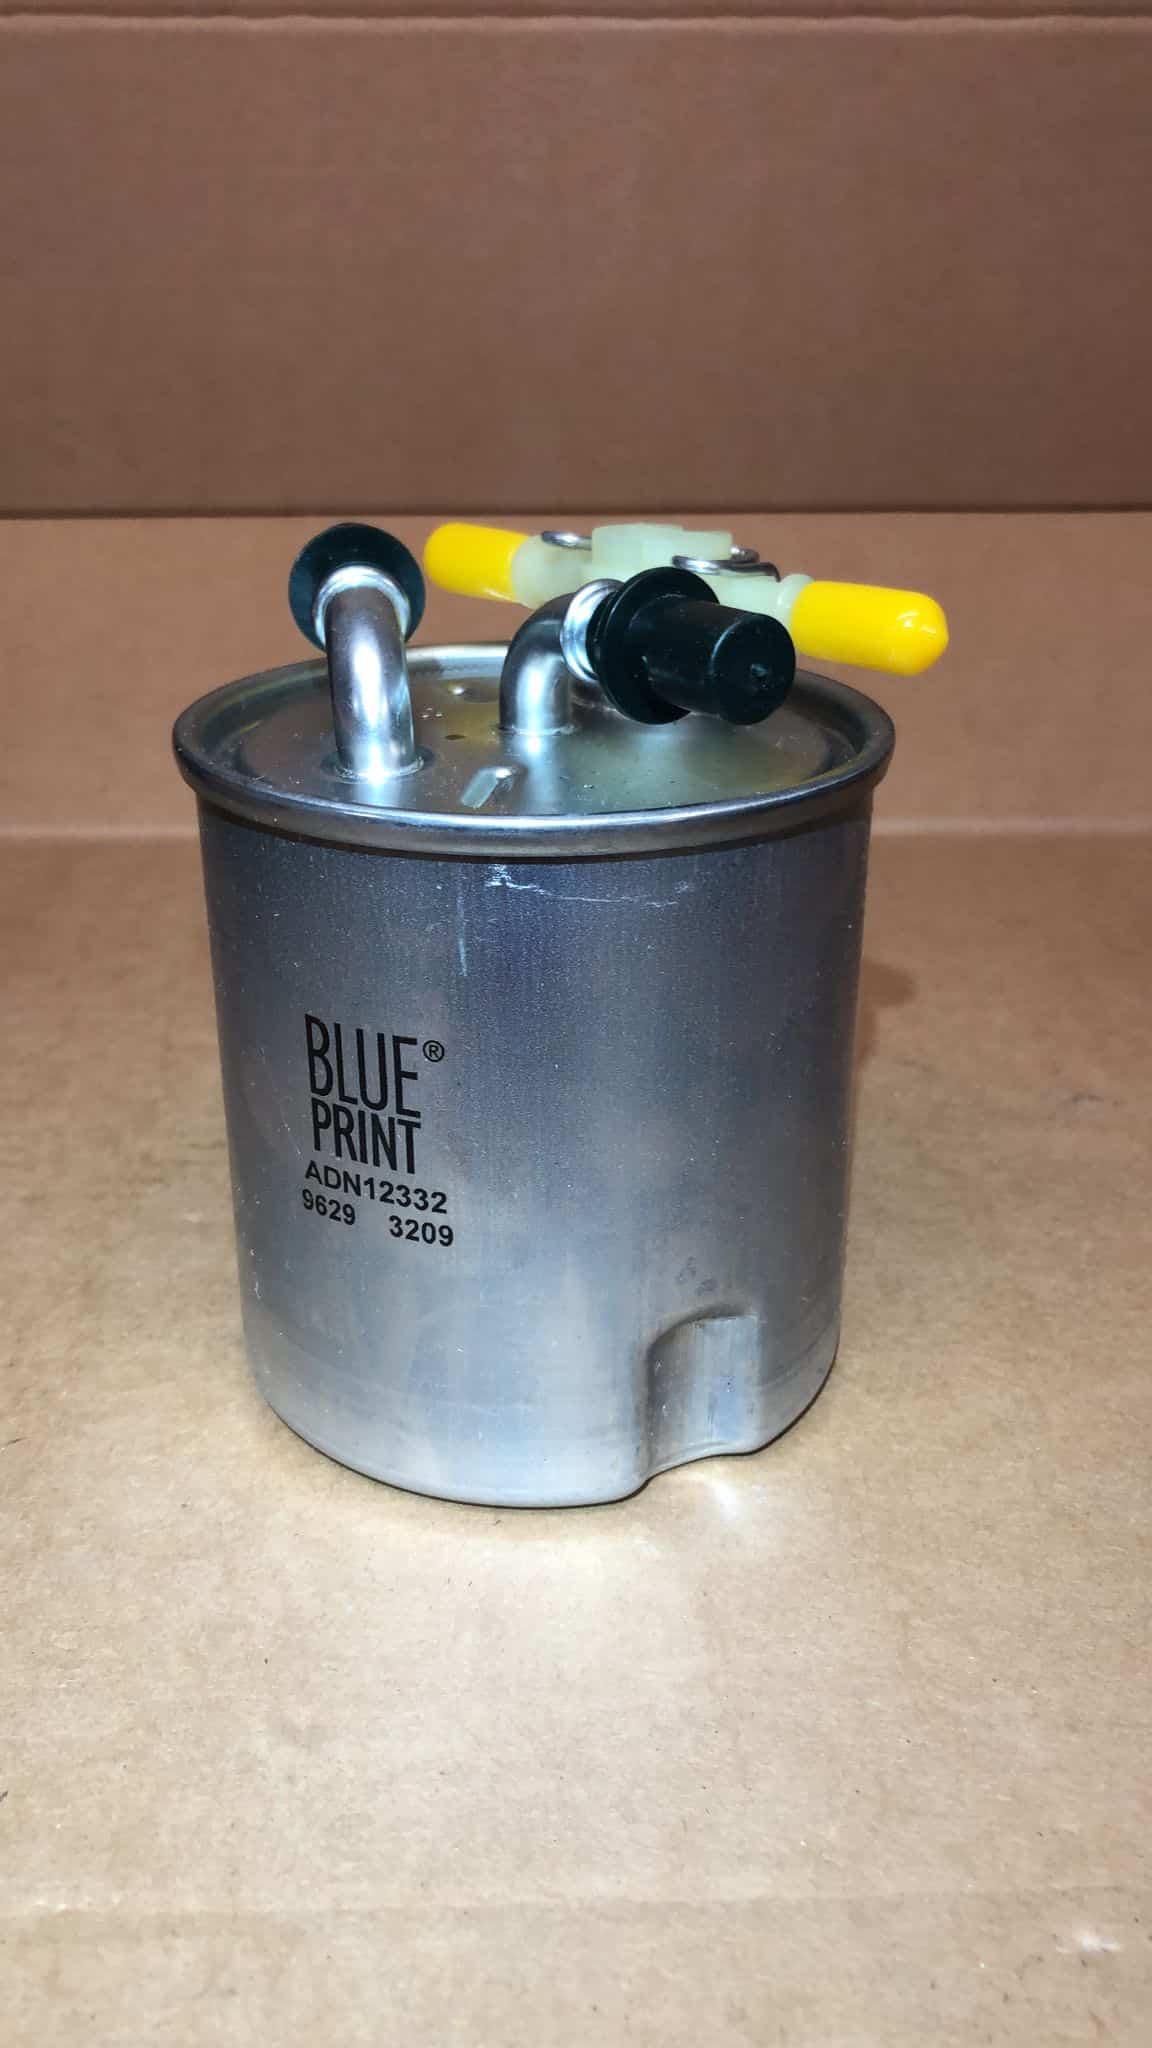 Blue Print ADN12332 Fuel Filter with valve, pack of one 3326